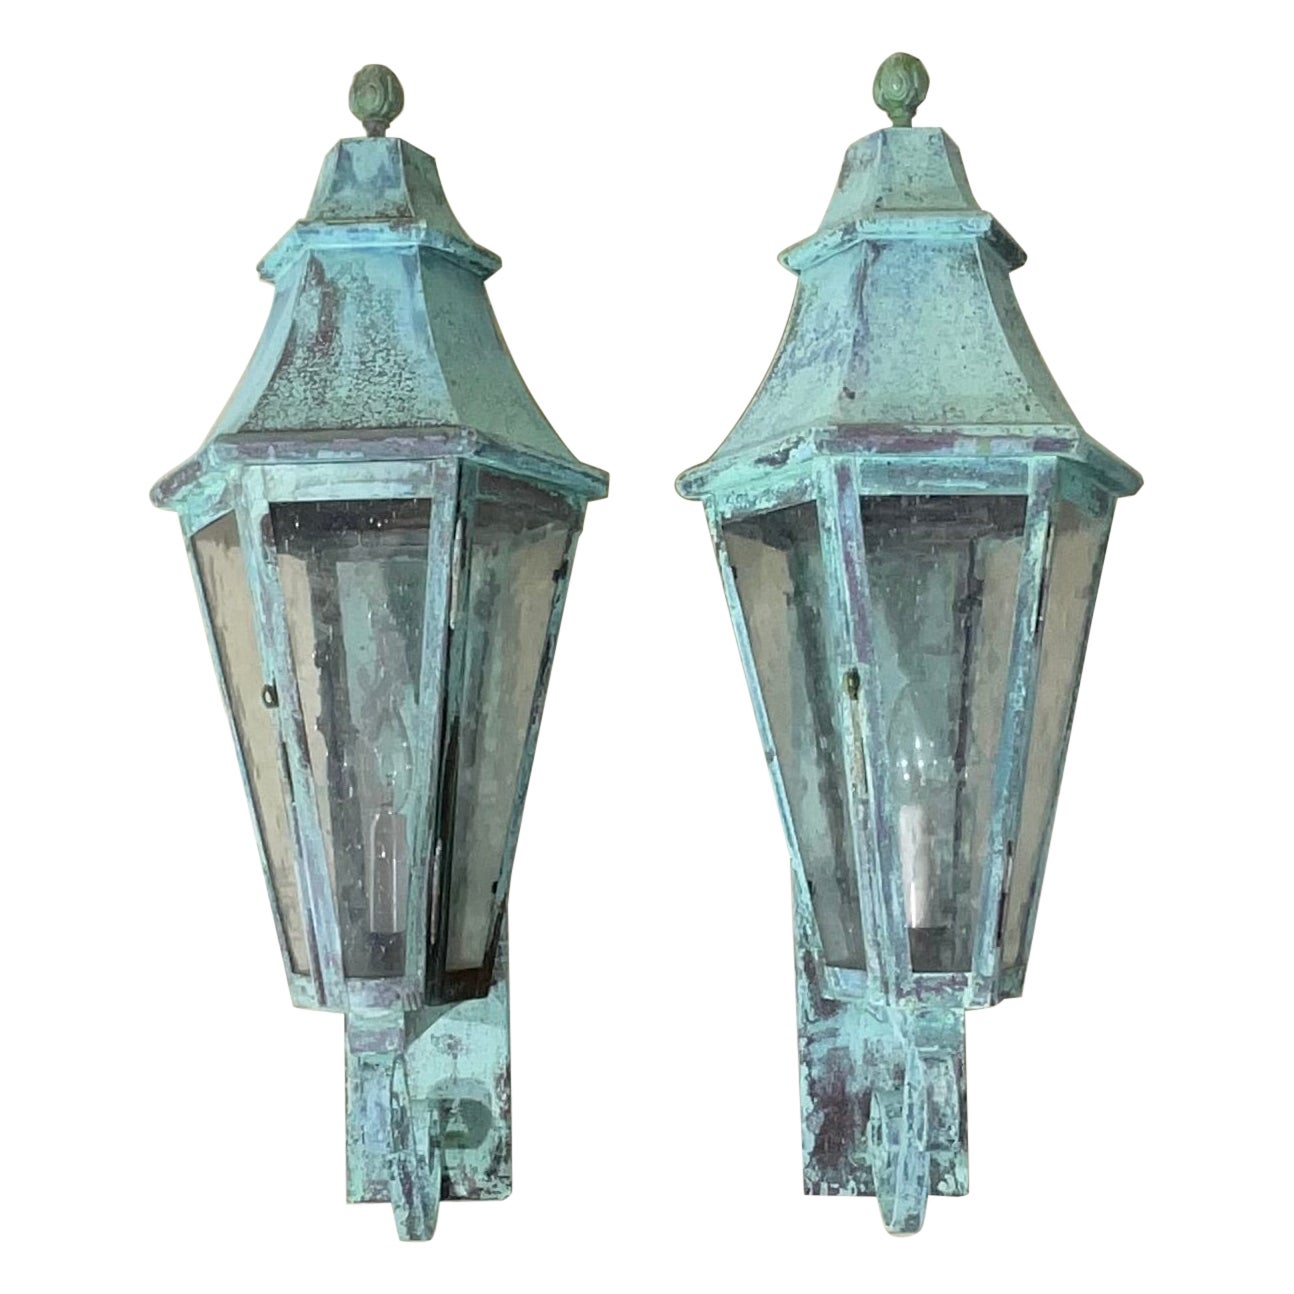 Pair of Large Solid Copper Architectural Wall Lantern